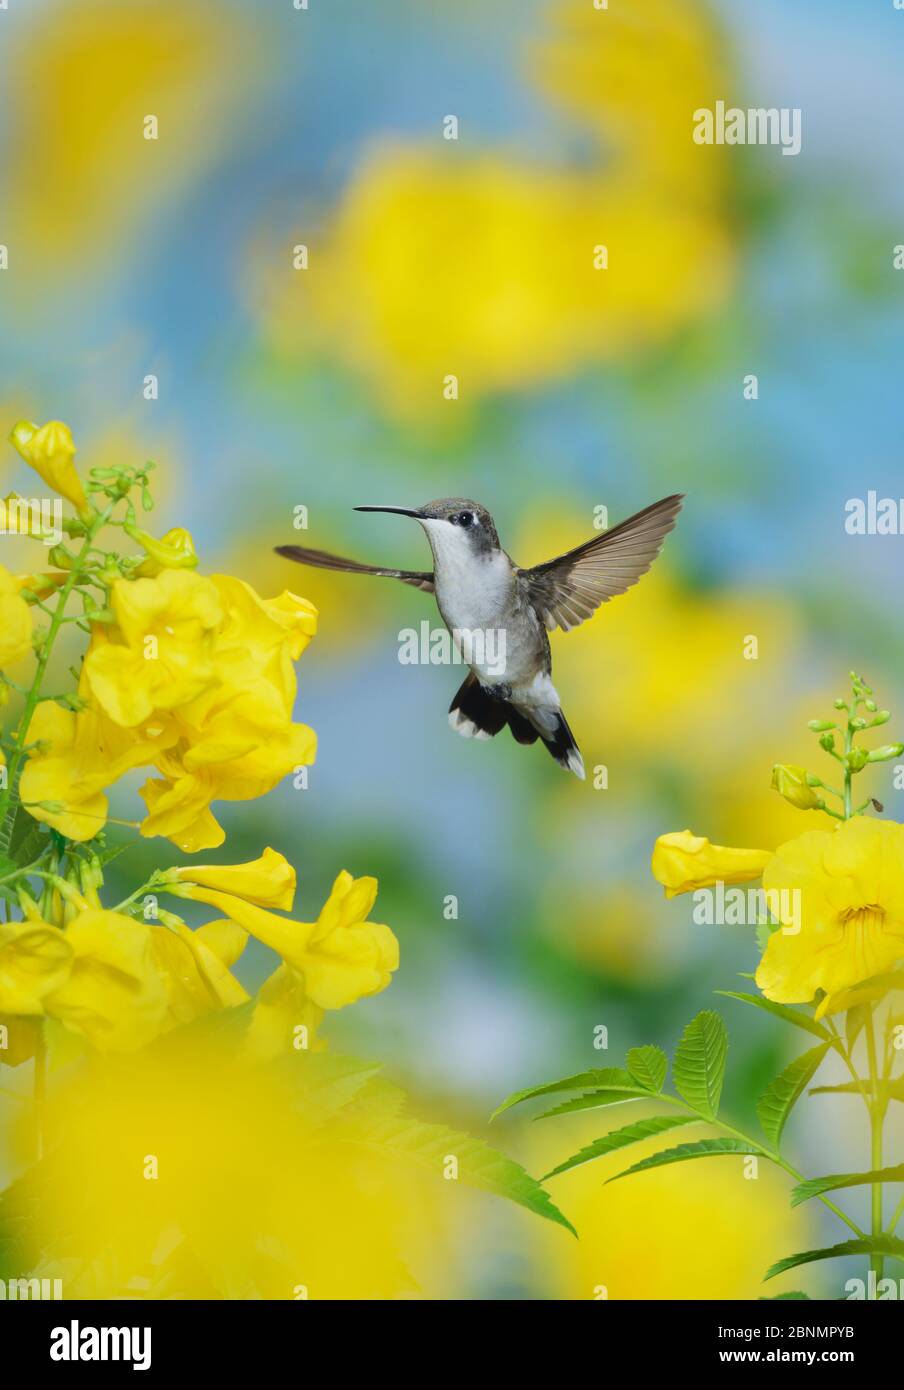 Ruby-throated hummingbird (Archilochus colubris), female in flight feeding on Yellow bells (Tecoma stans) flower, Hill Country, Texas, USA. September Stock Photo